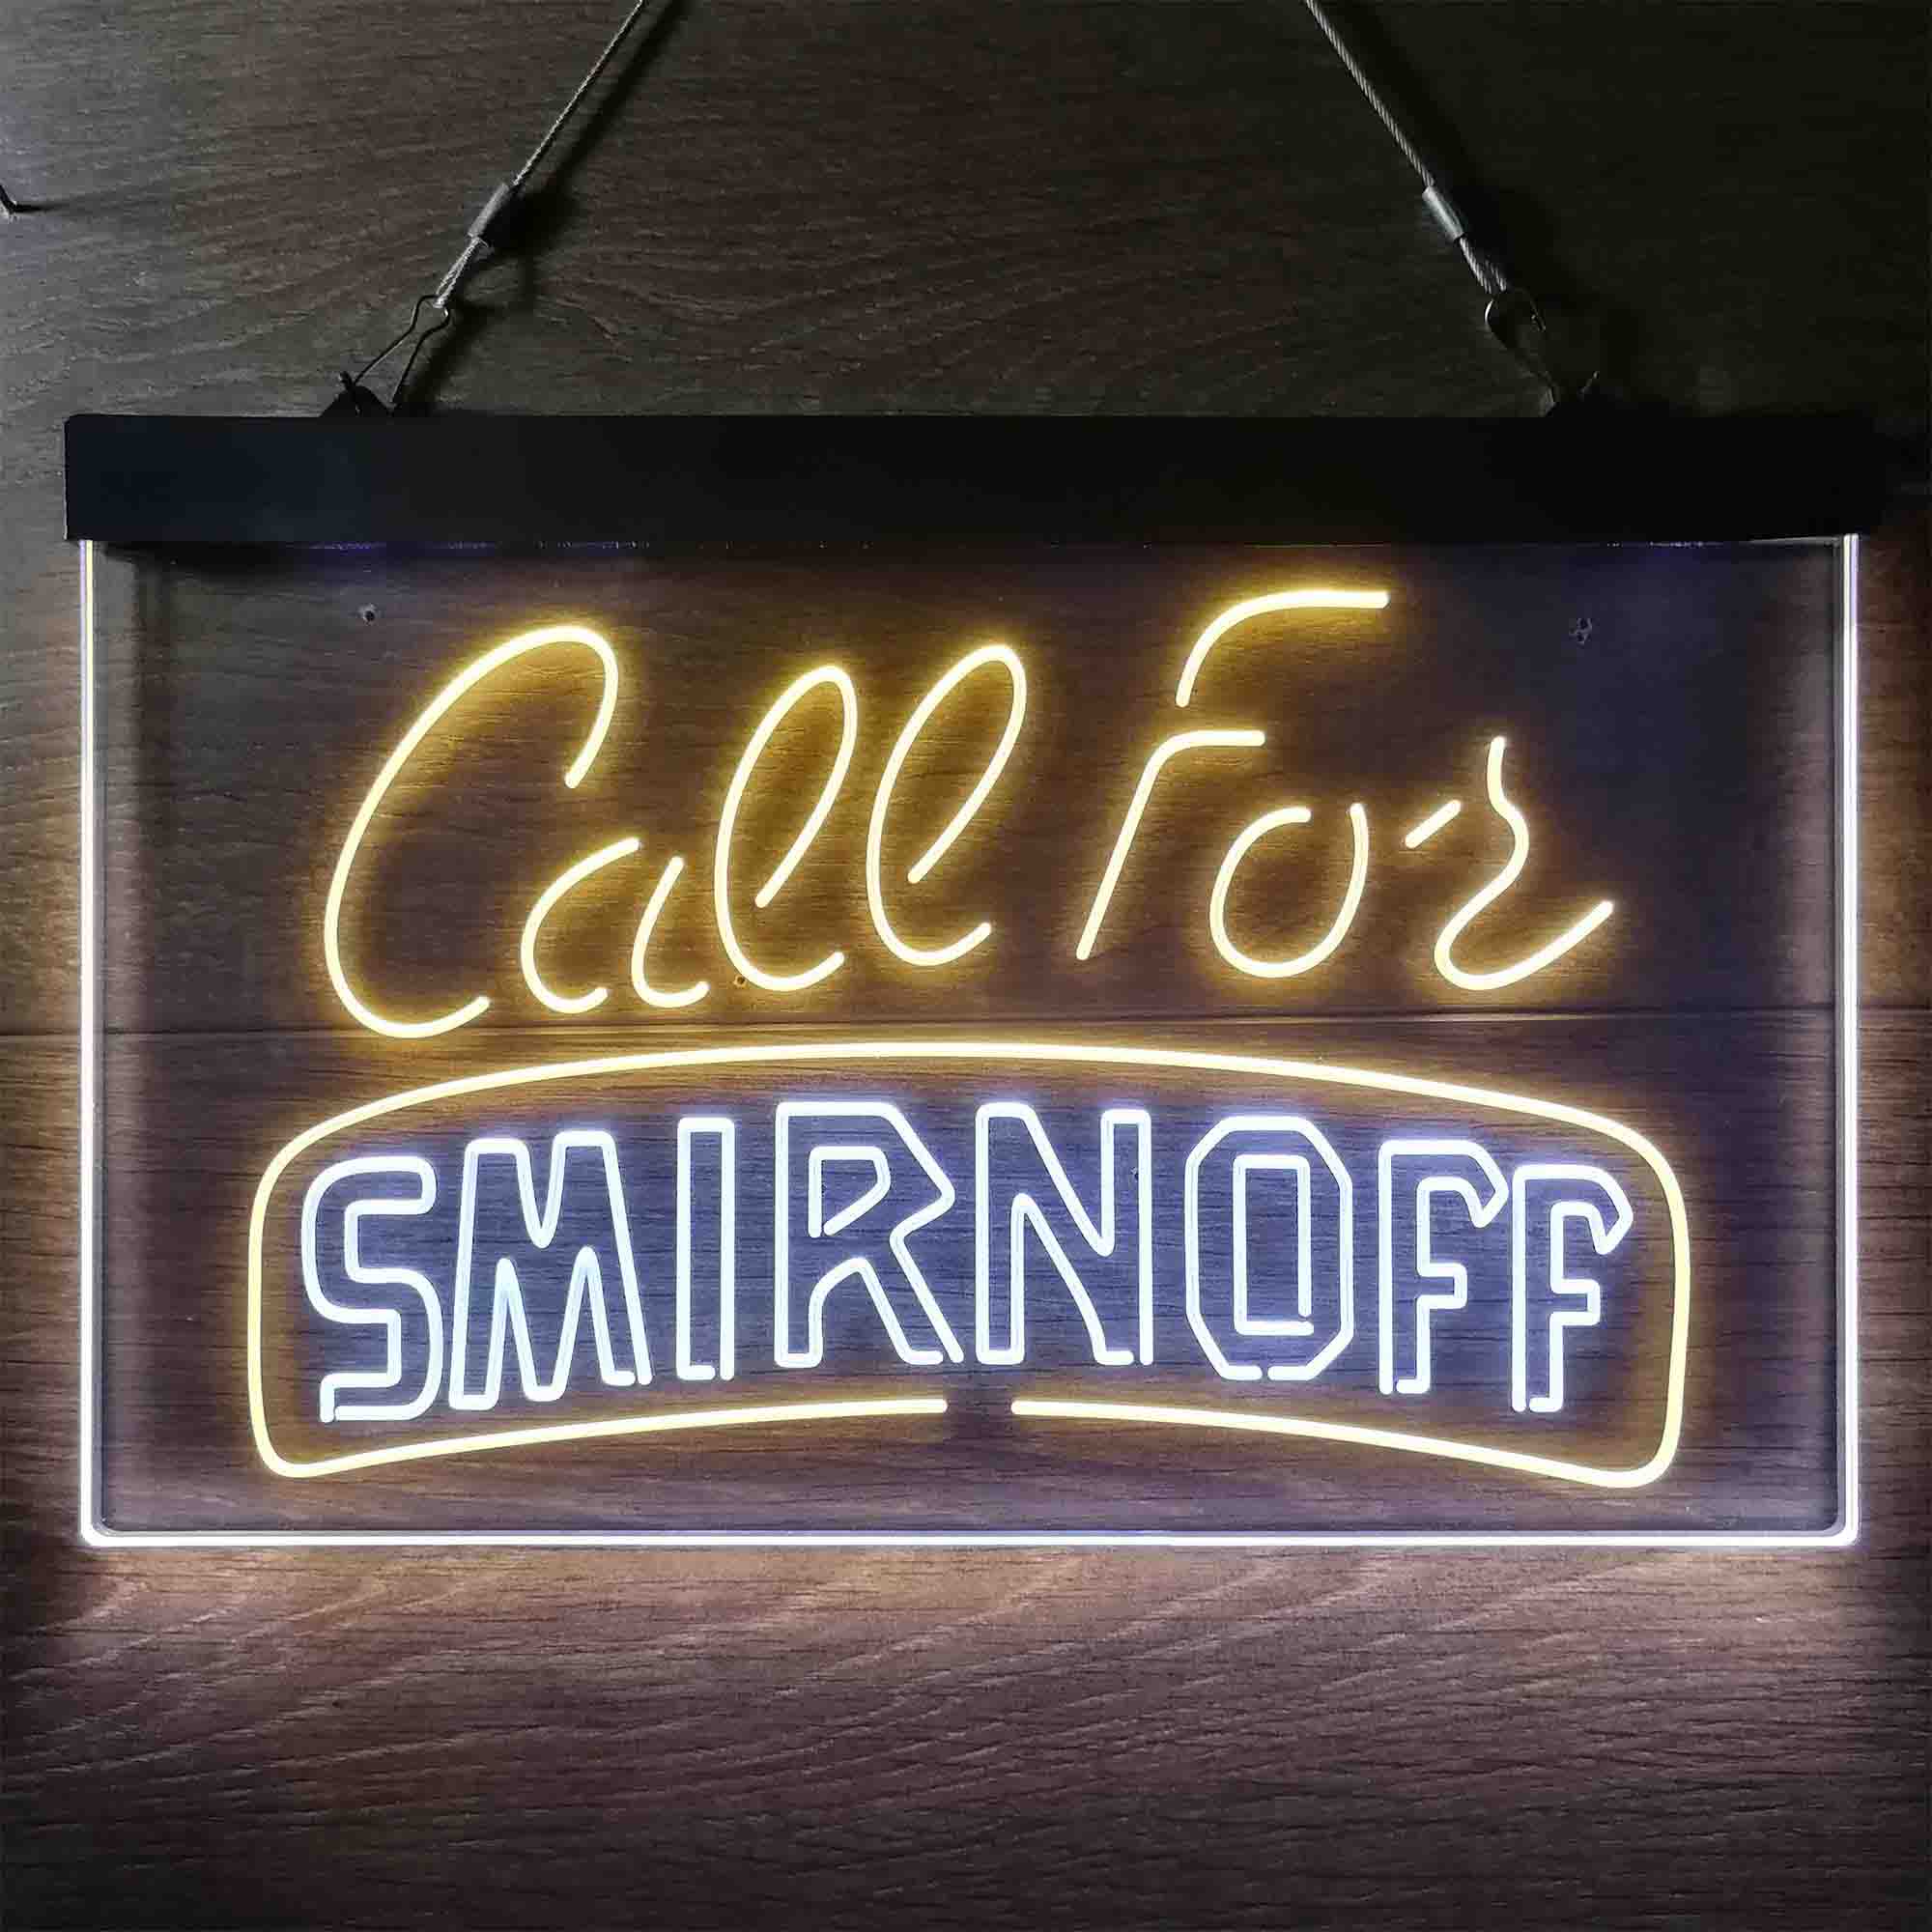 Call For Smirnoff Dual Color LED Neon Sign ProLedSign